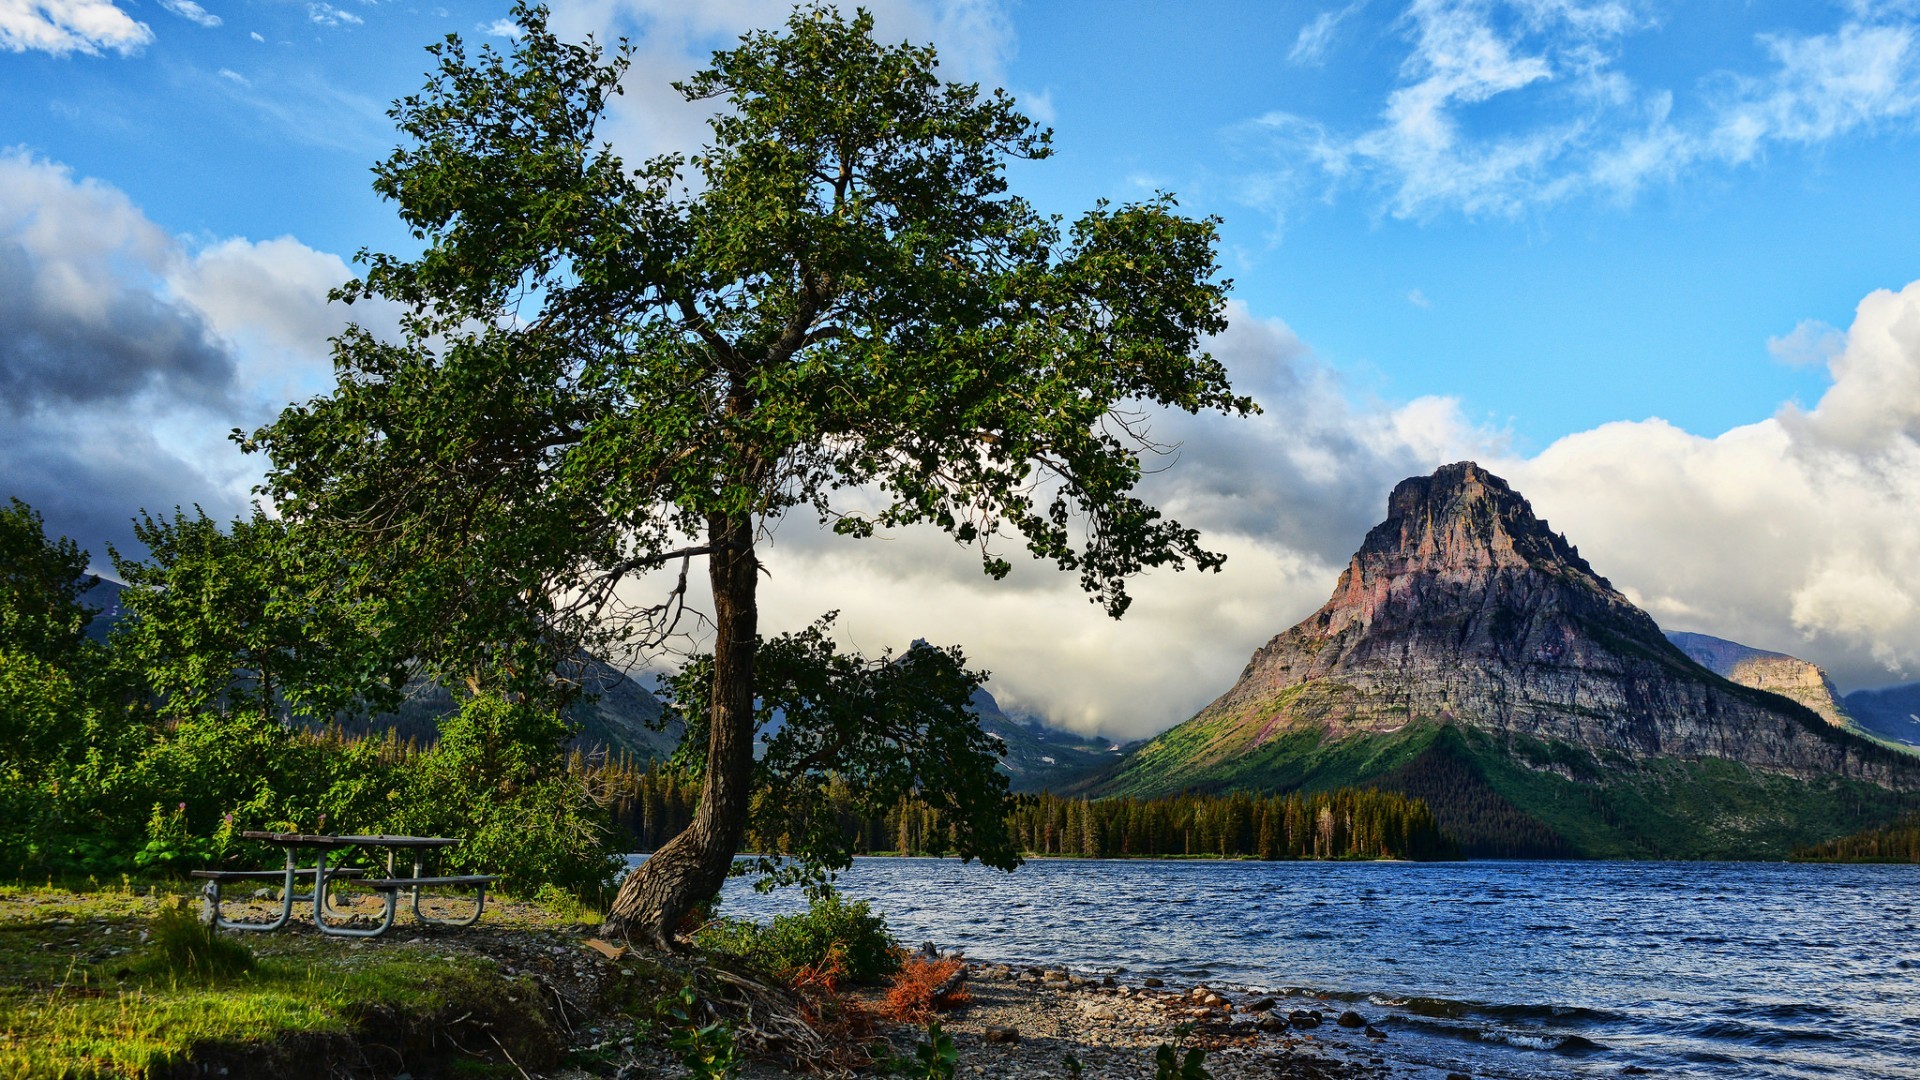 Nature Landscape Mountains Water Lake Trees Montana USA Glacier National Park Bench Clouds Forest Hi 1920x1080